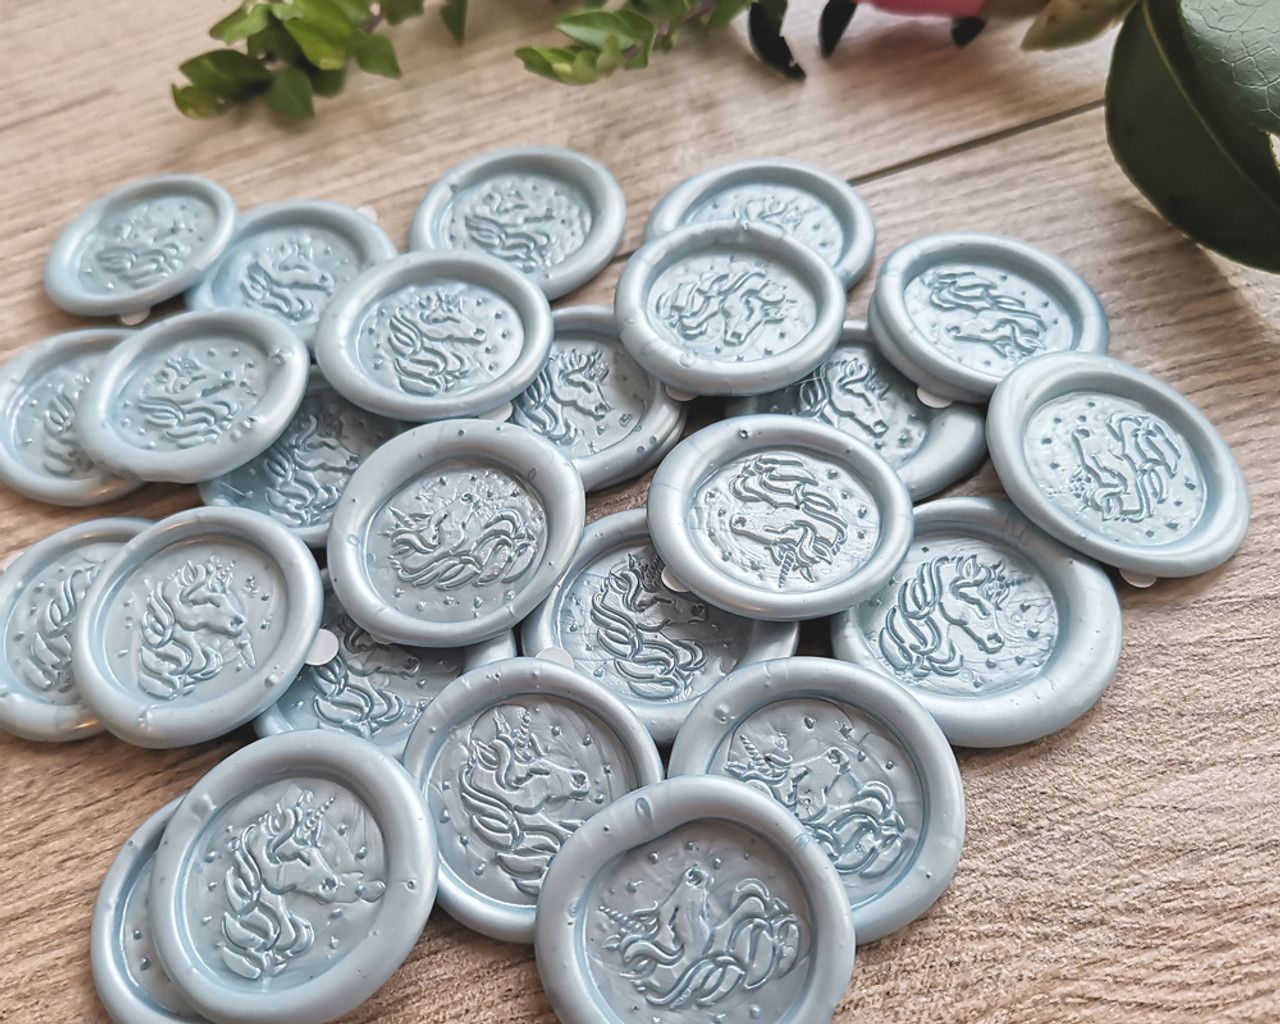 Botanical Adhesive Wax Seal Stickers 25Pk - Pre-Made from Real